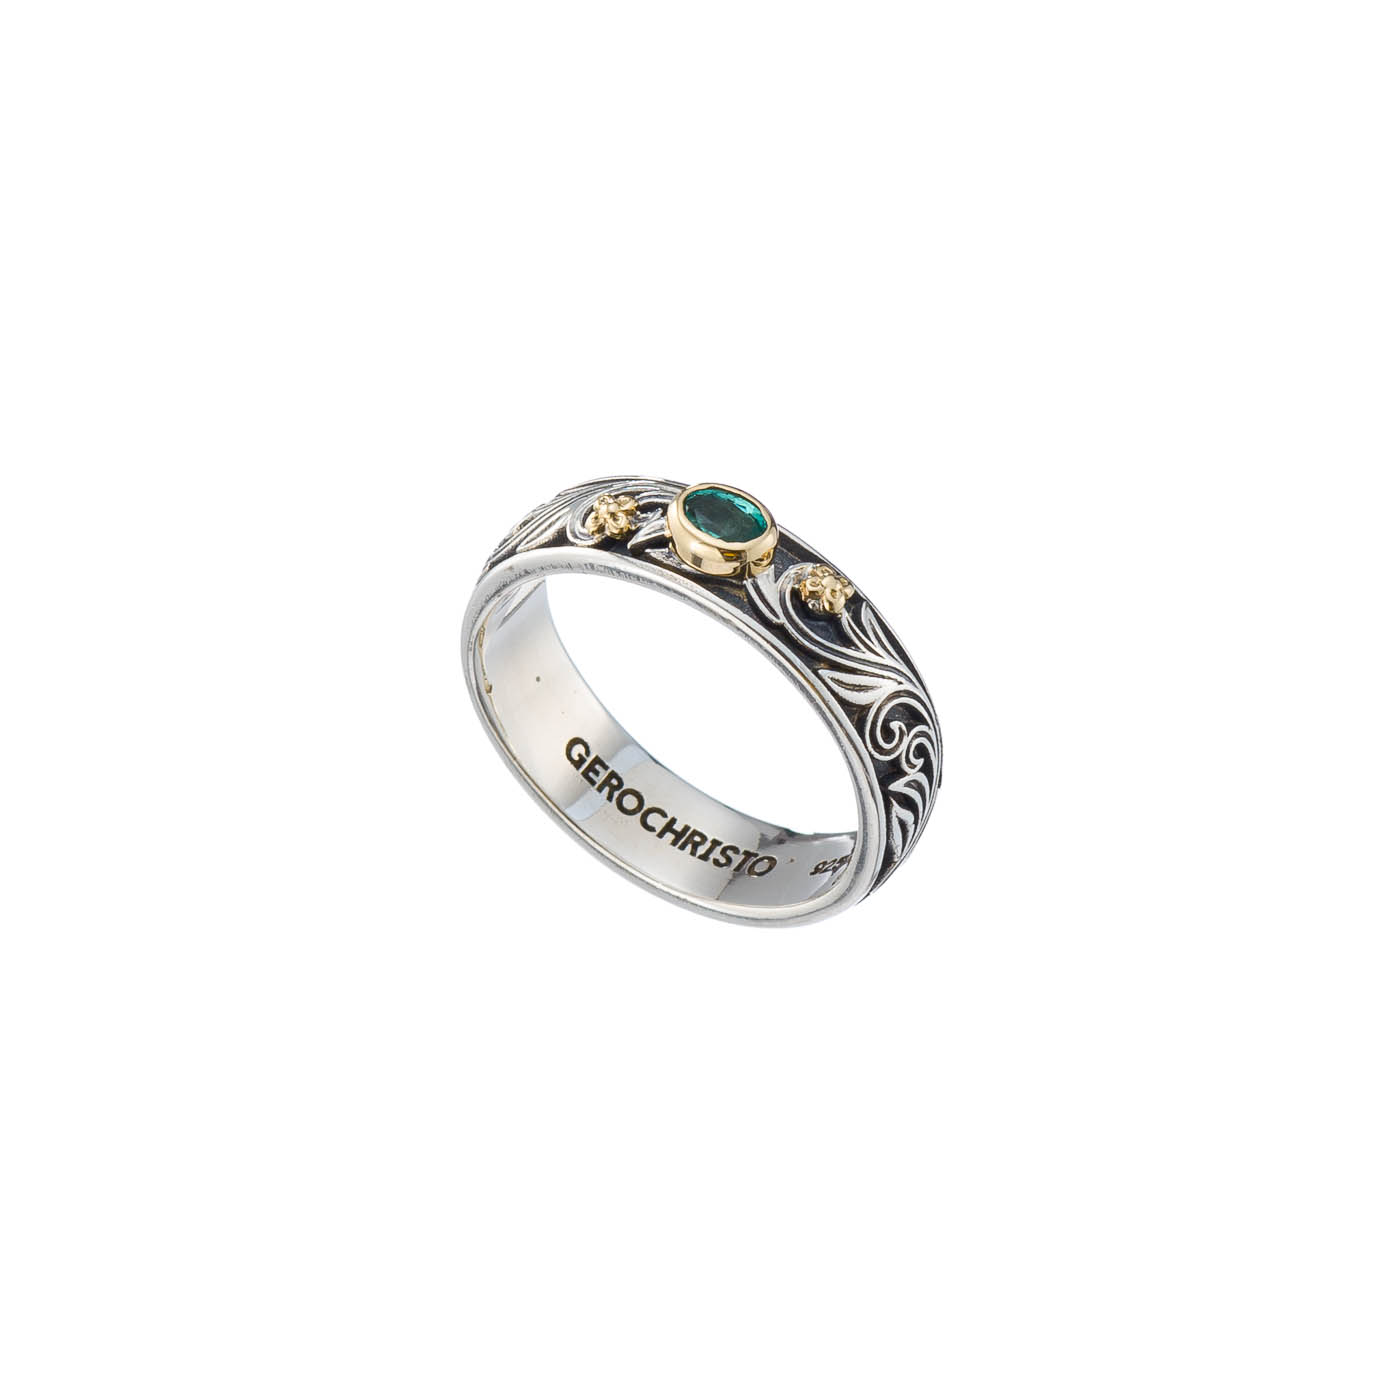 Floral band ring in 18K Gold and Sterling Silver with Gemstone